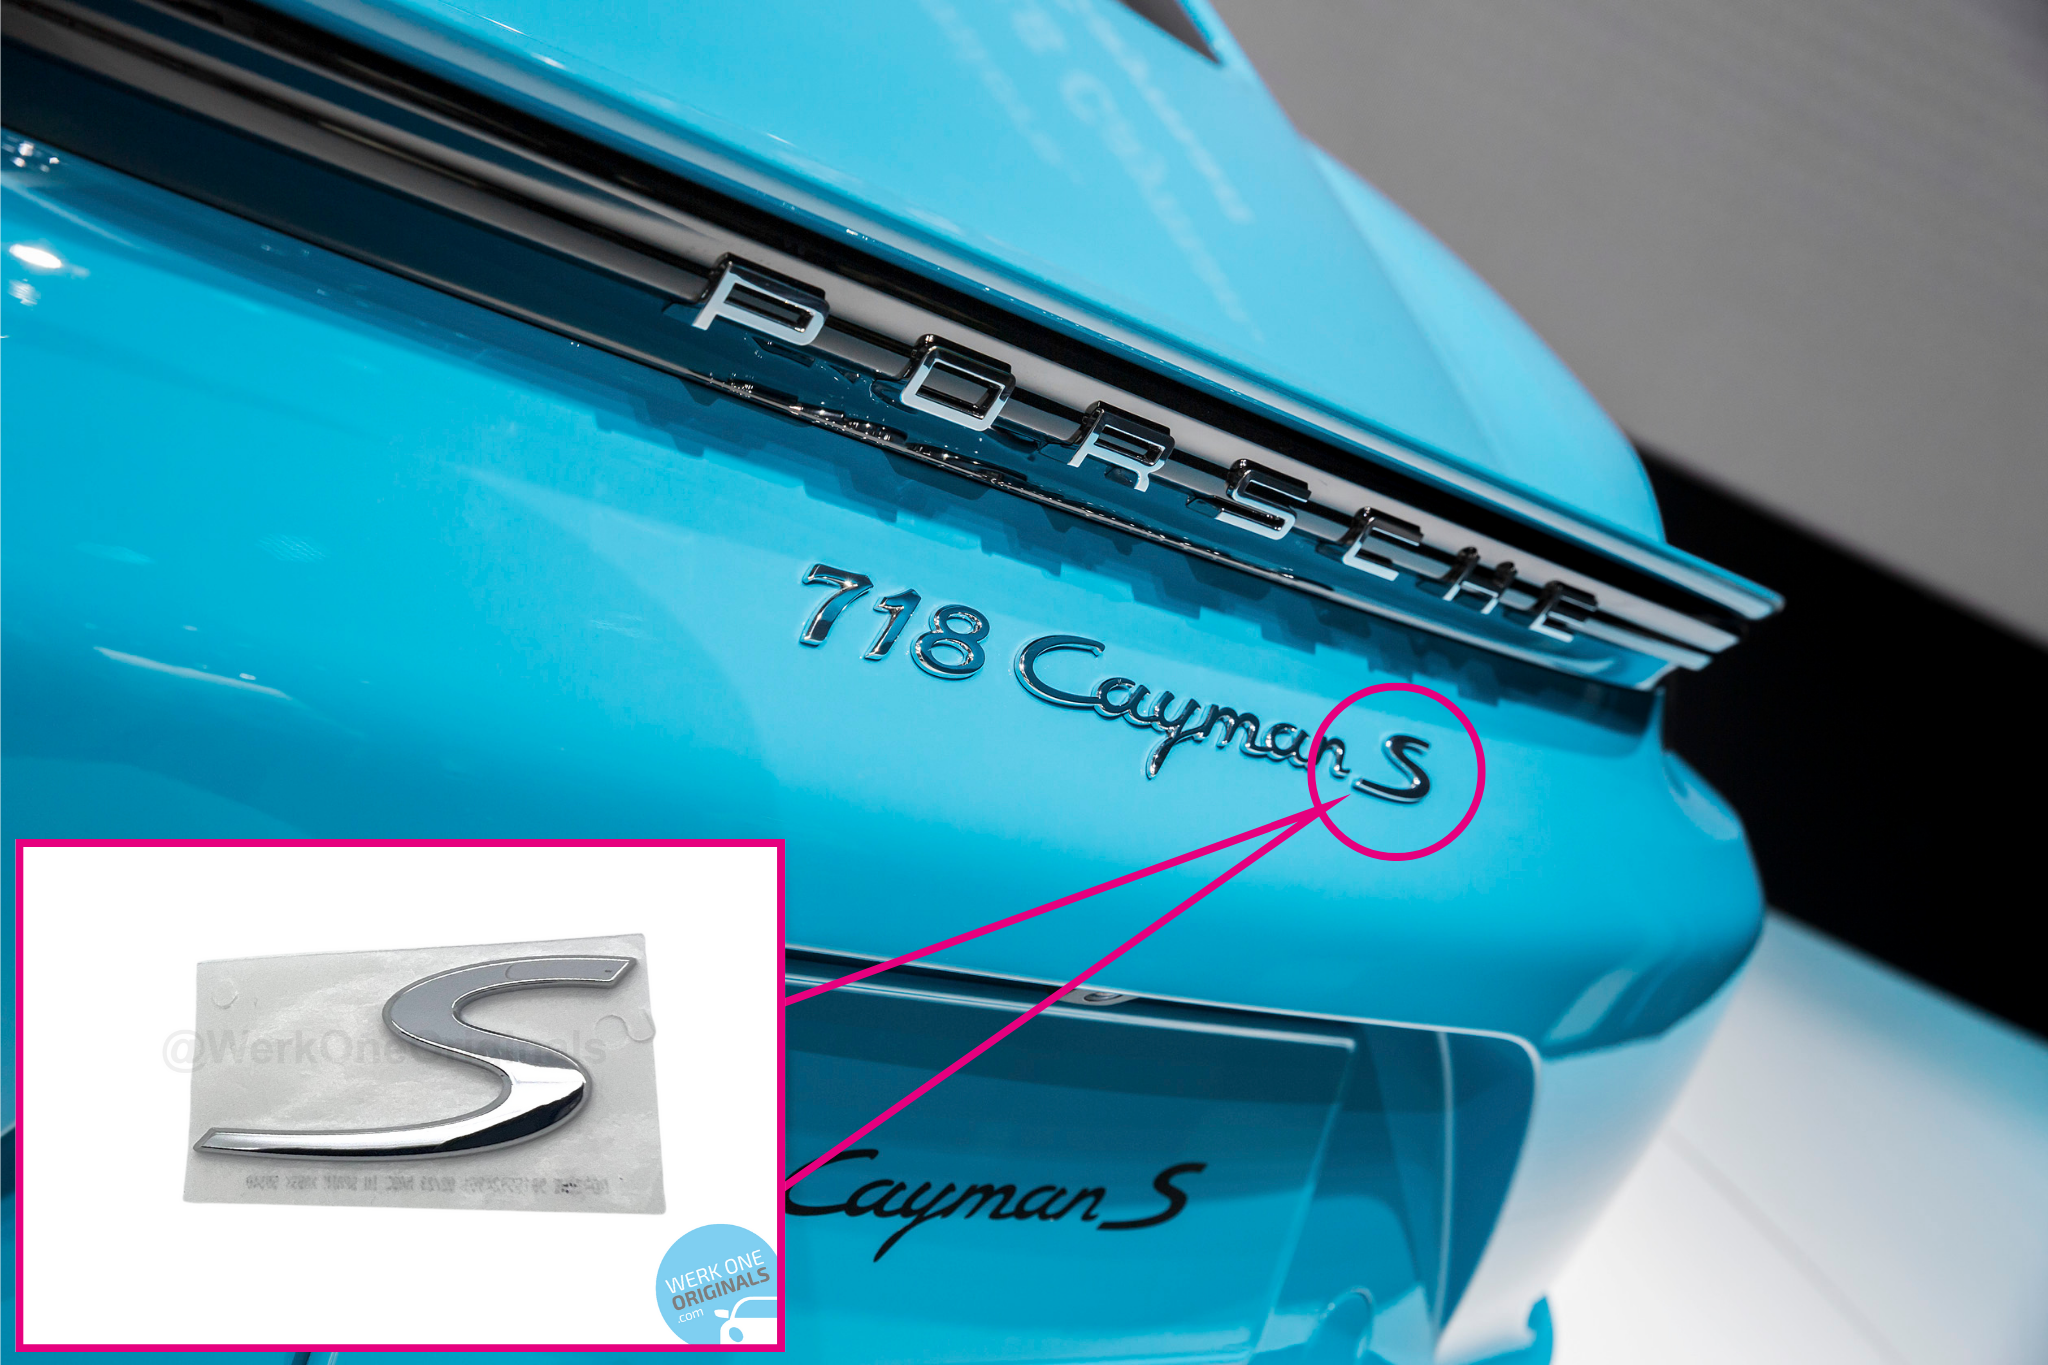 Porsche Official 'S' Rear Badge Decal in Chrome Silver for Cayman S Type 718 Models